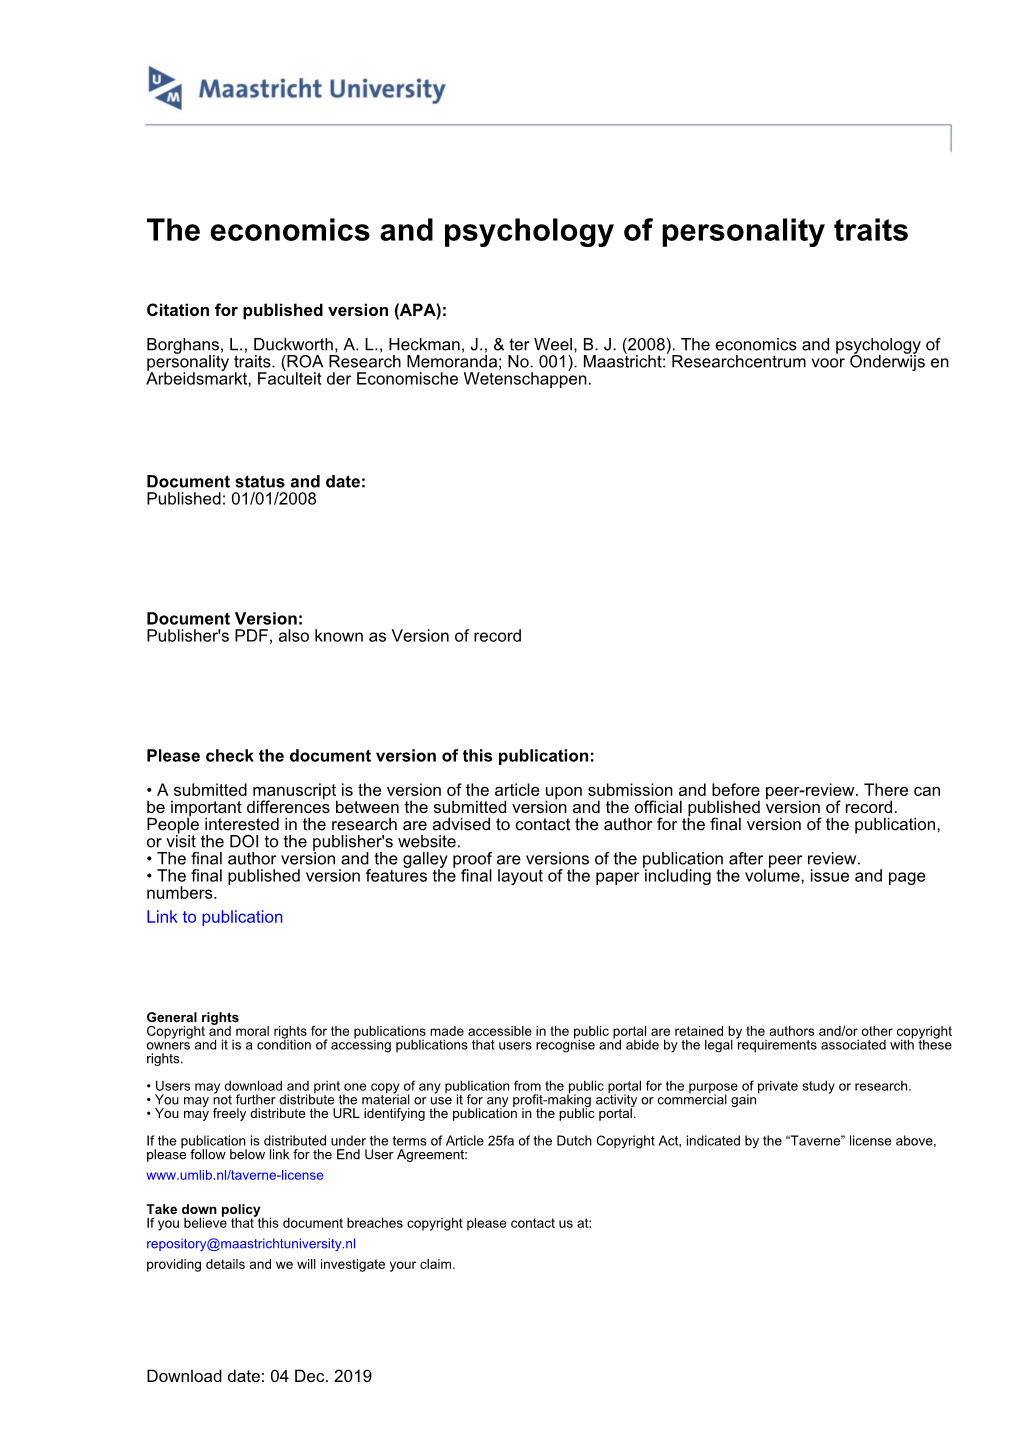 The Economics and Psychology of Personality Traits